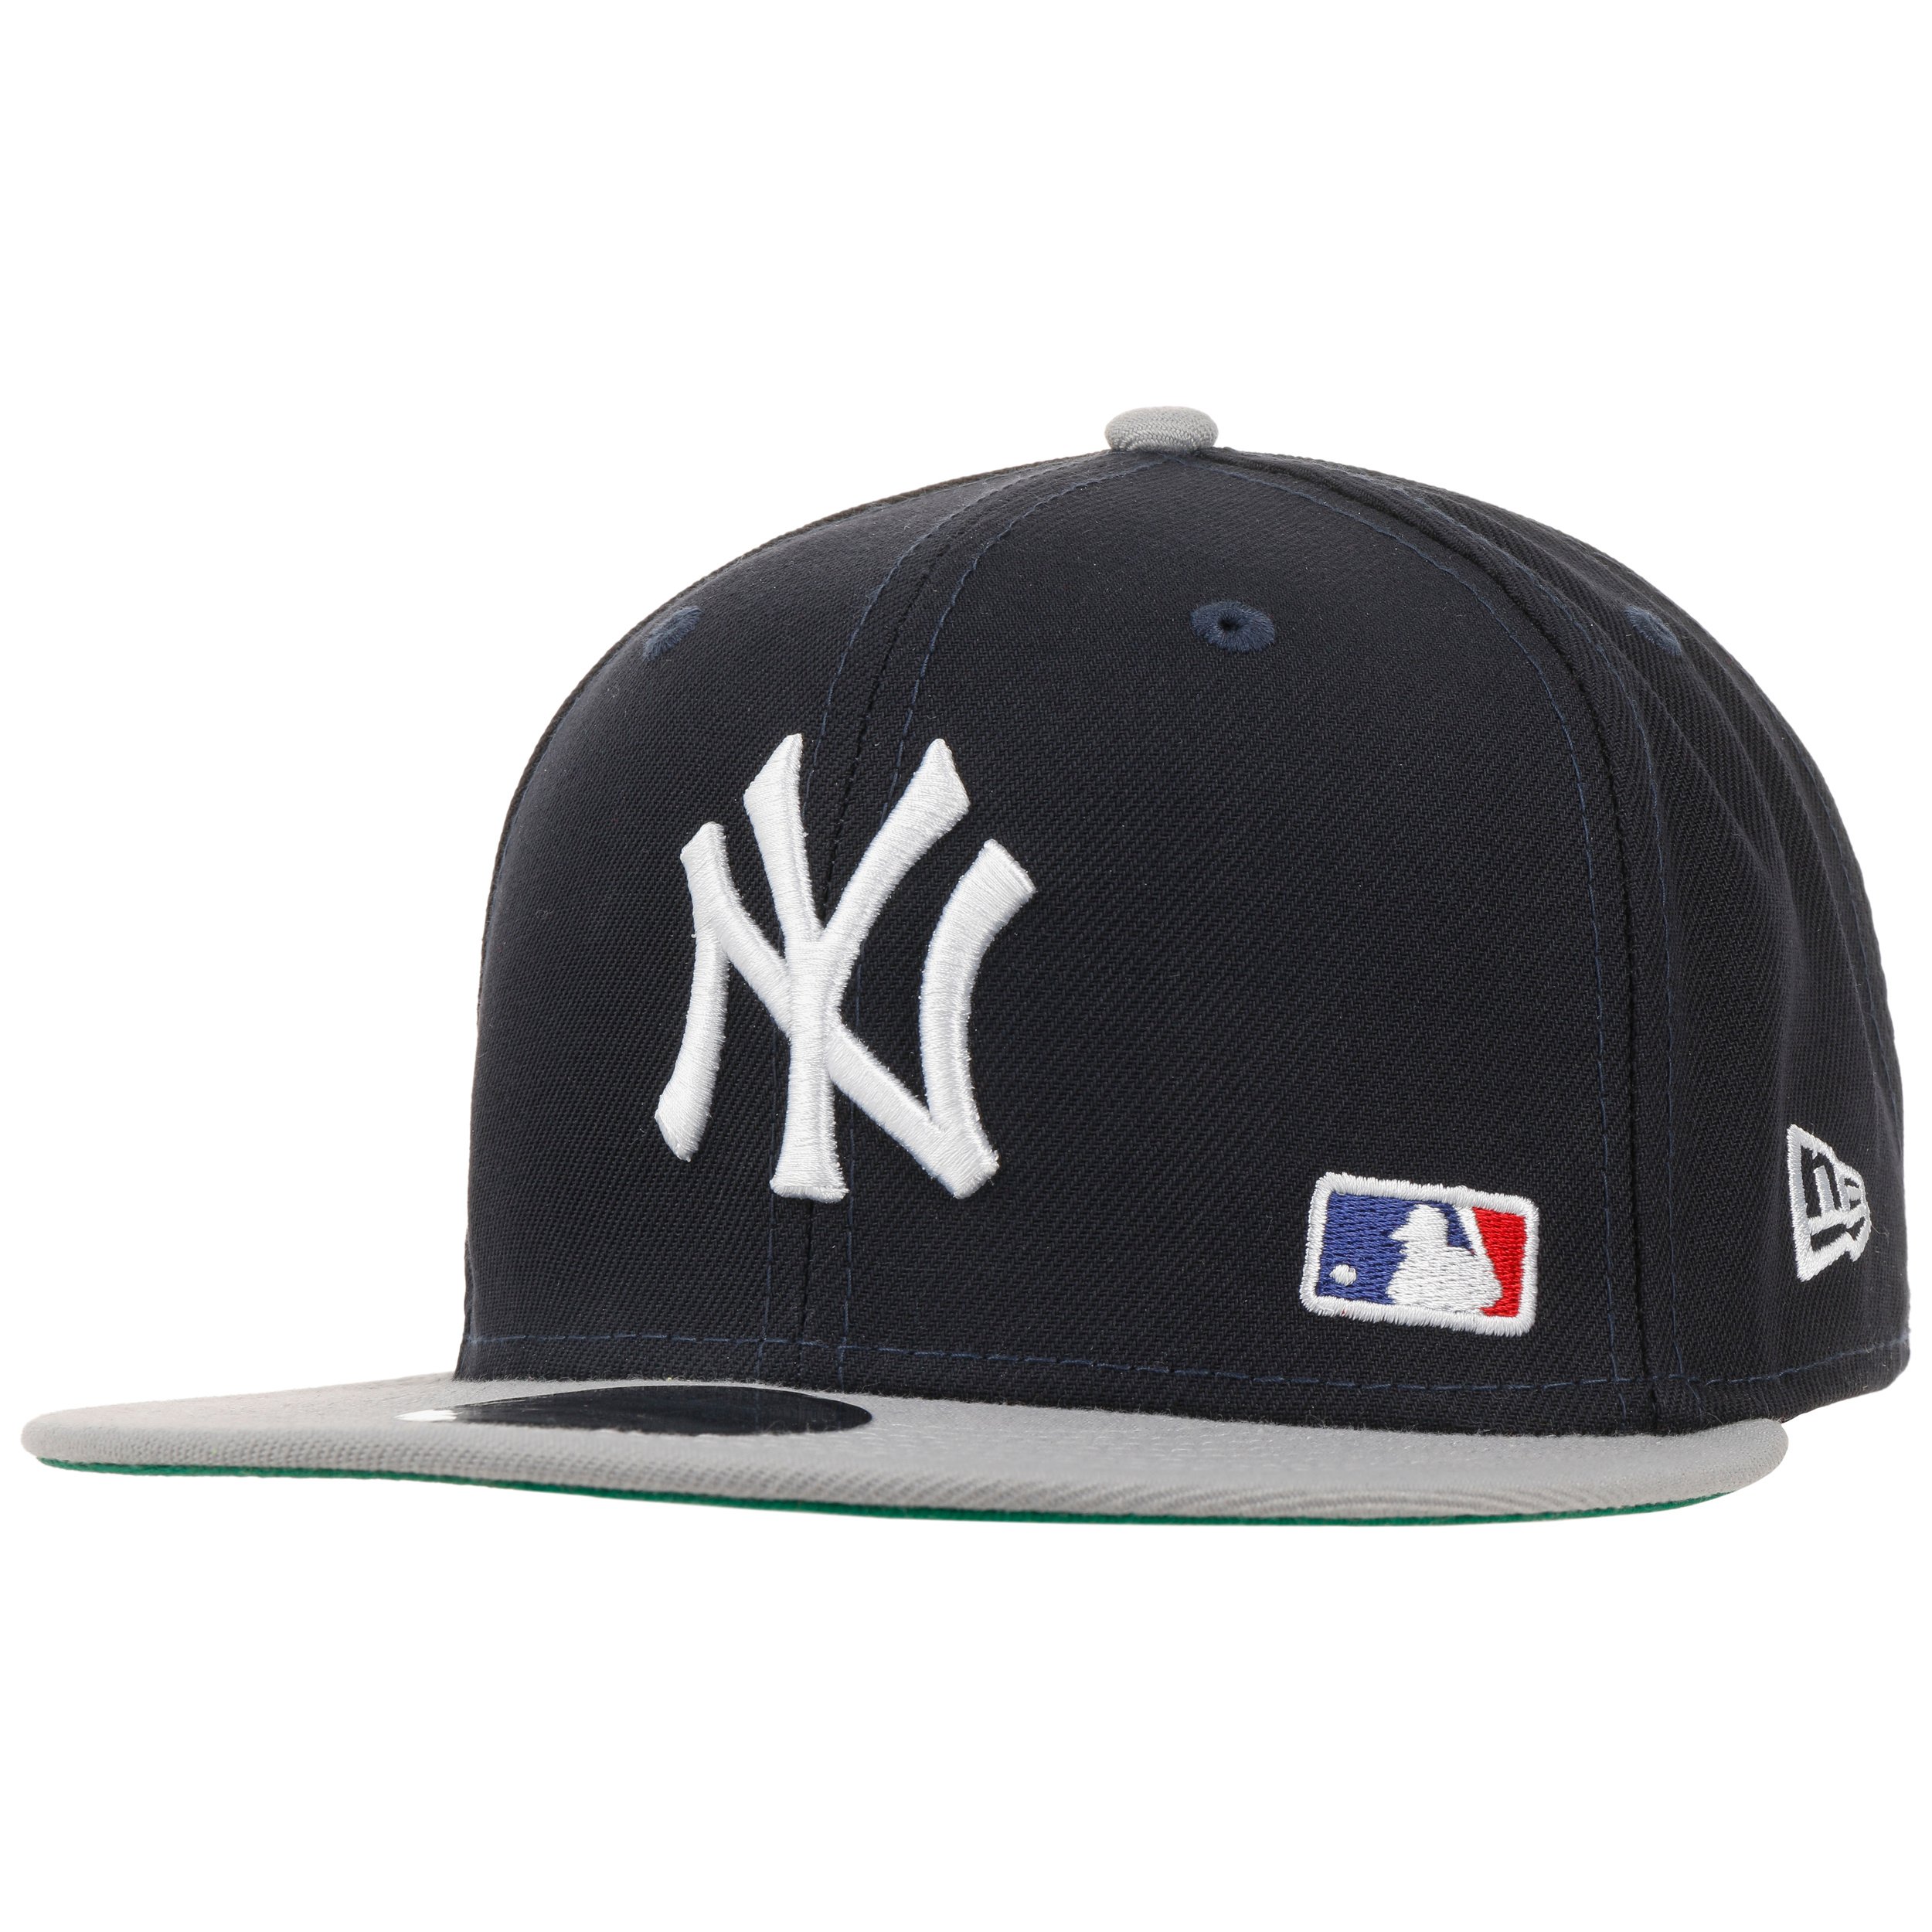 software achter In de naam 9Fifty MLB Team Arch Yankees Cap by New Era - 46,95 €